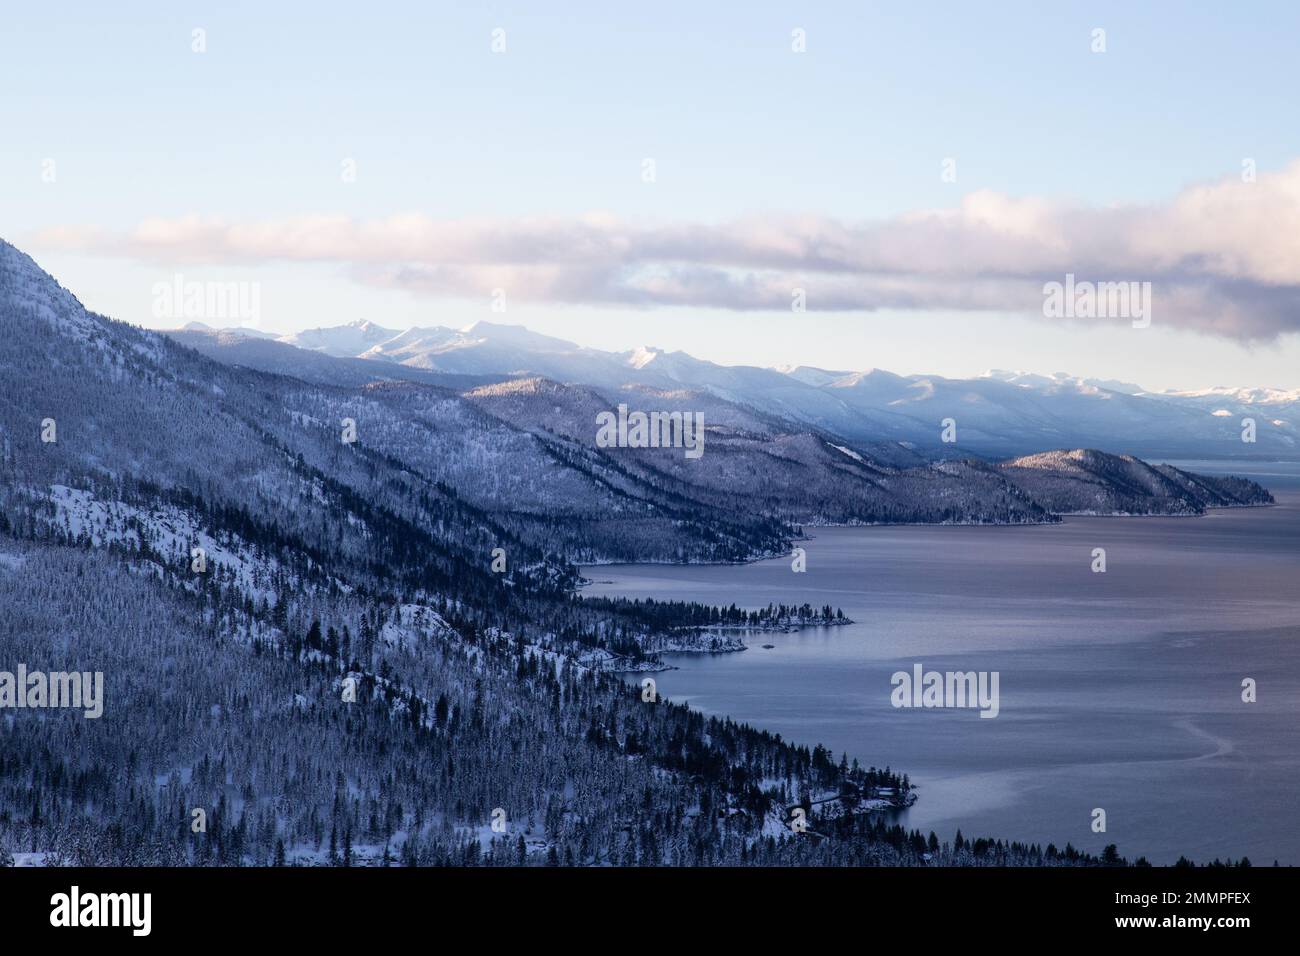 Paysage d'hiver - Lac Tahoe - Tahoe National Forest After Snow - Californie / Nevada Banque D'Images